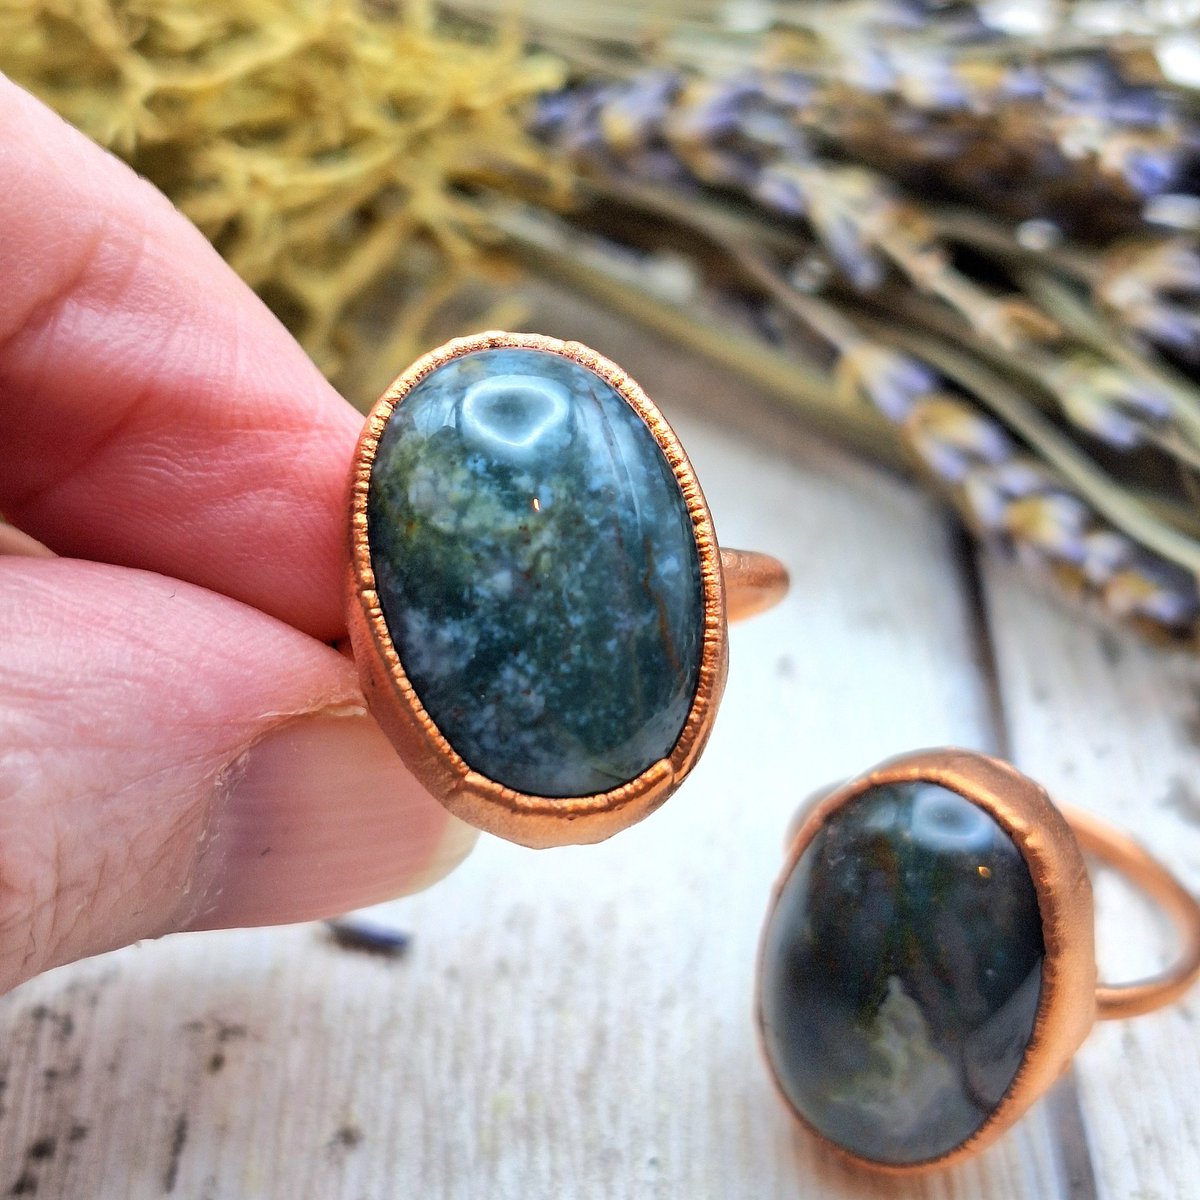 Polished up some of my Moss Agate electroformed copper rings. These are lovely chunky statement rings.

#electroforming #electroformed #copperjewelry #alchemy #jewelleryartist #thetwistedkitty #rings #statementjewelry #mossagate